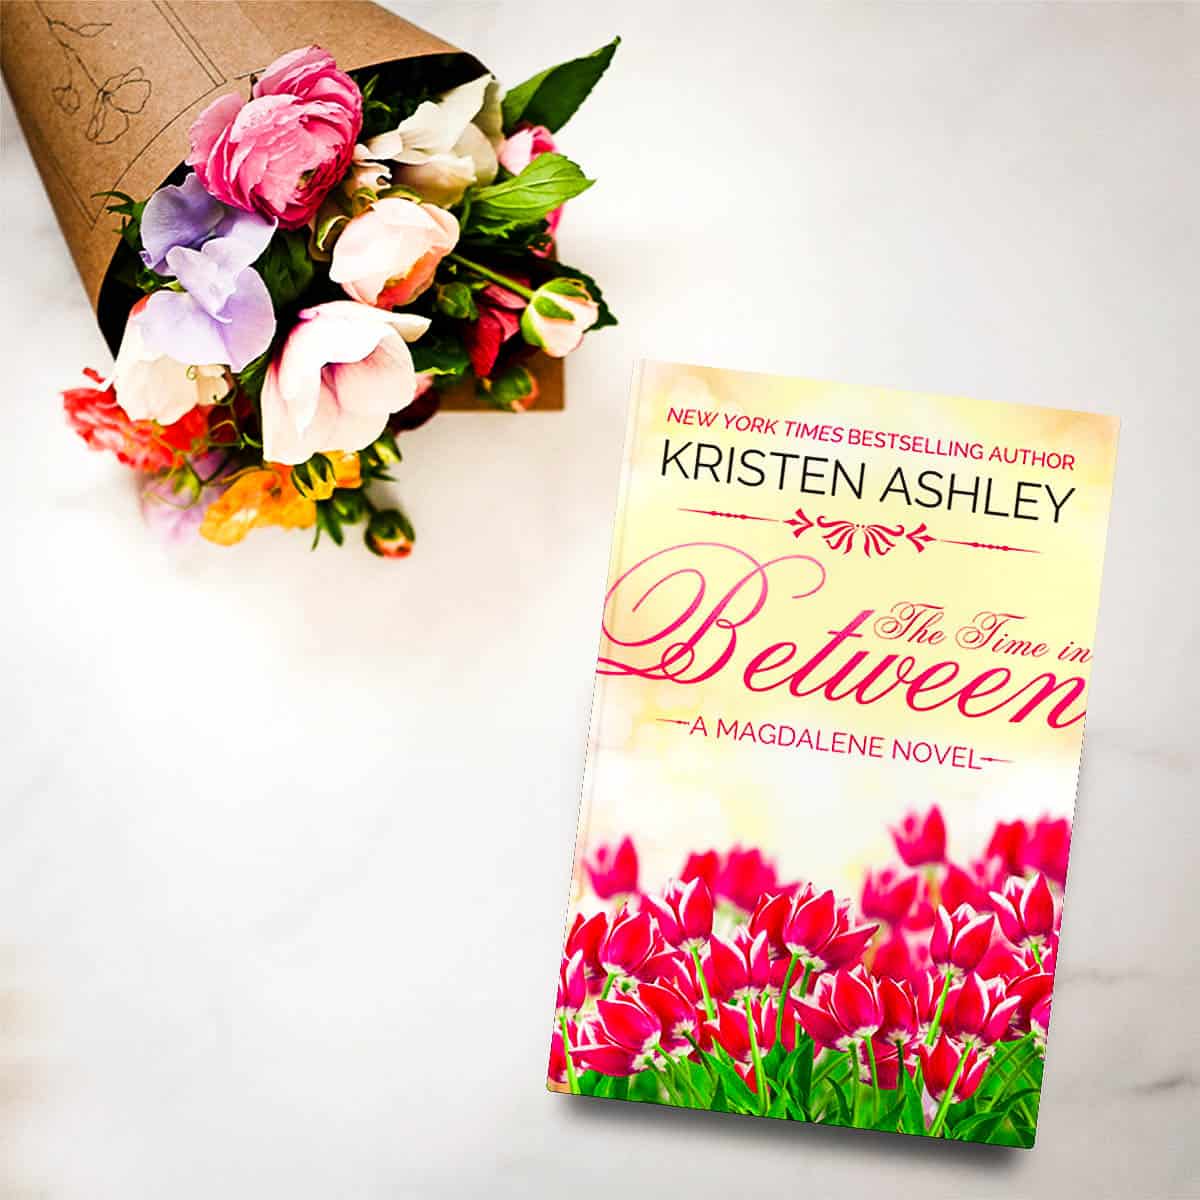 The final standalone title in the Magdalene Series, THE TIME IN BETWEEN by Kristen Ashley is a rich, heartfelt love story and available now!